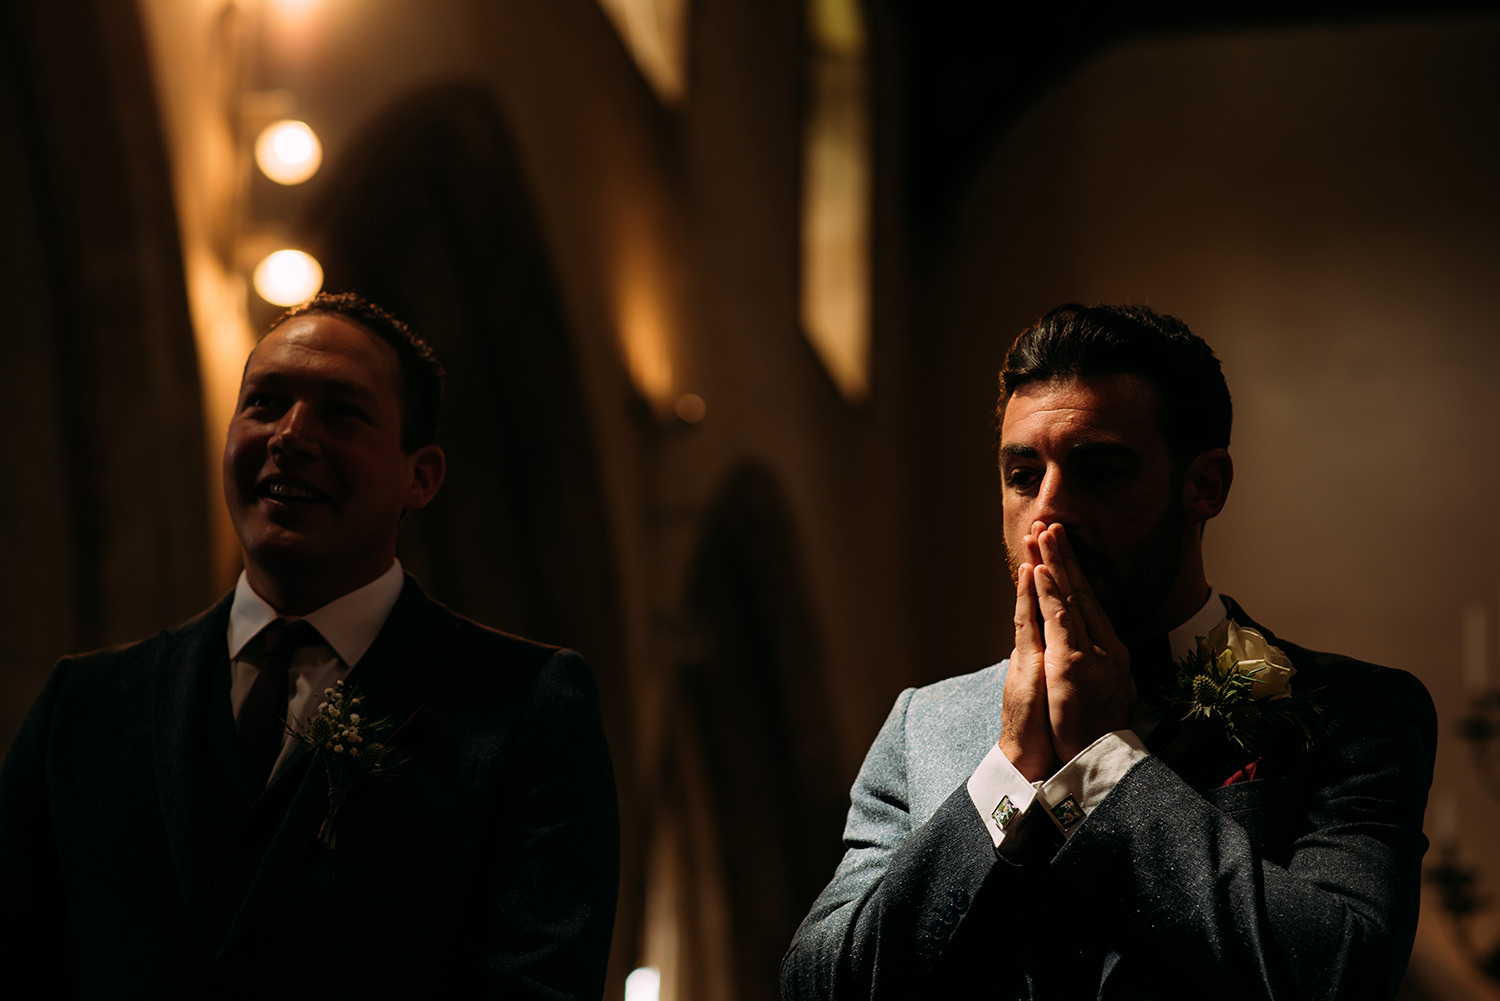  groom rubs his face nervously in strong light 